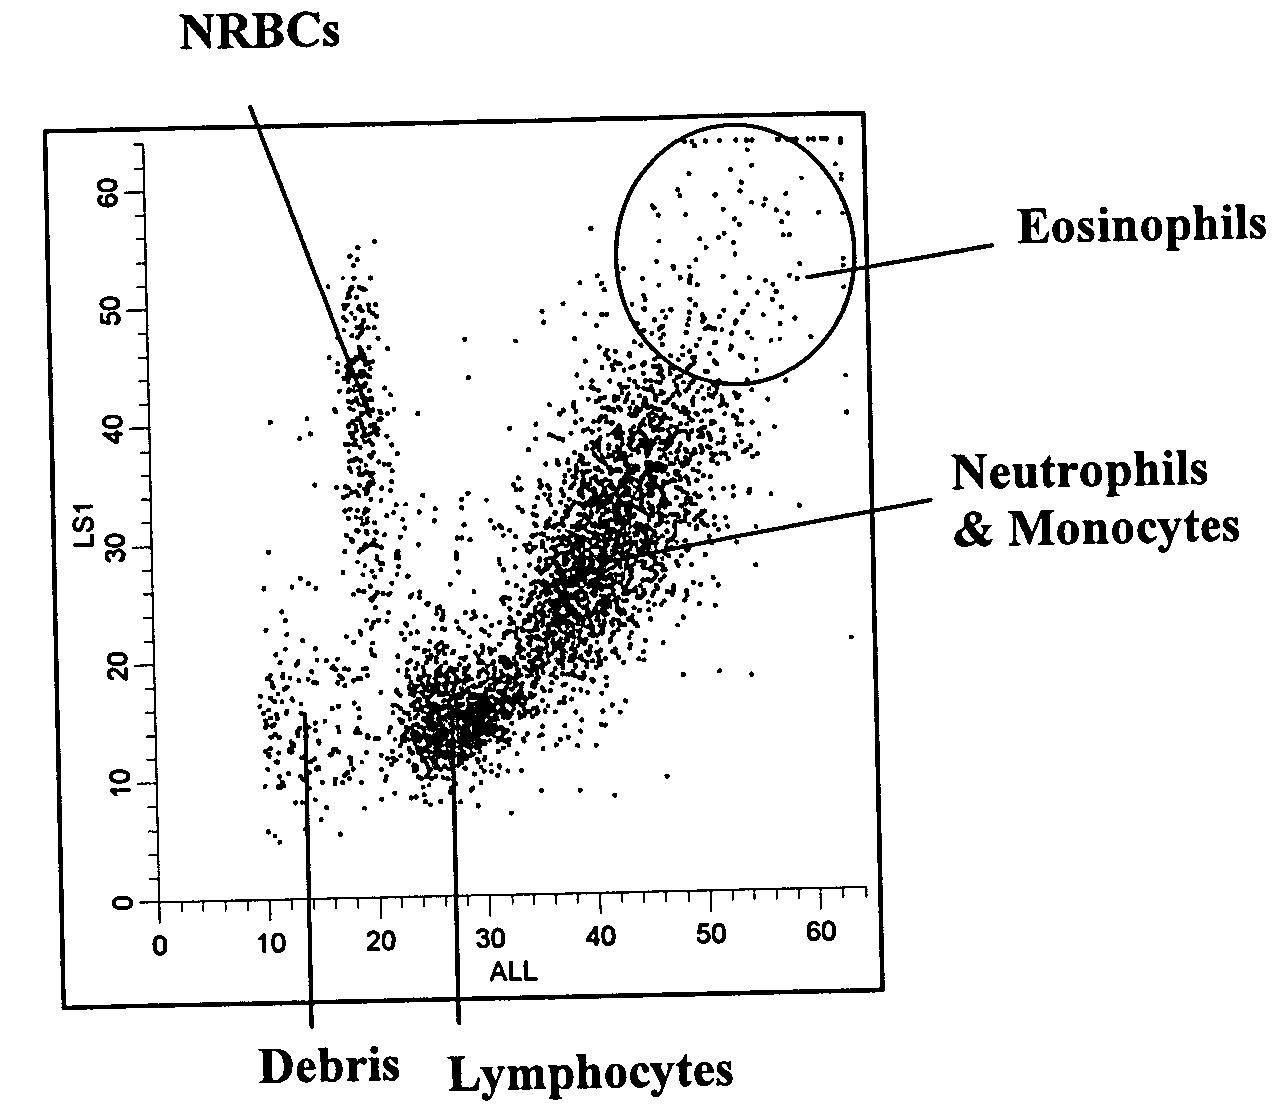 Method of measurement of nucleated red blood cells